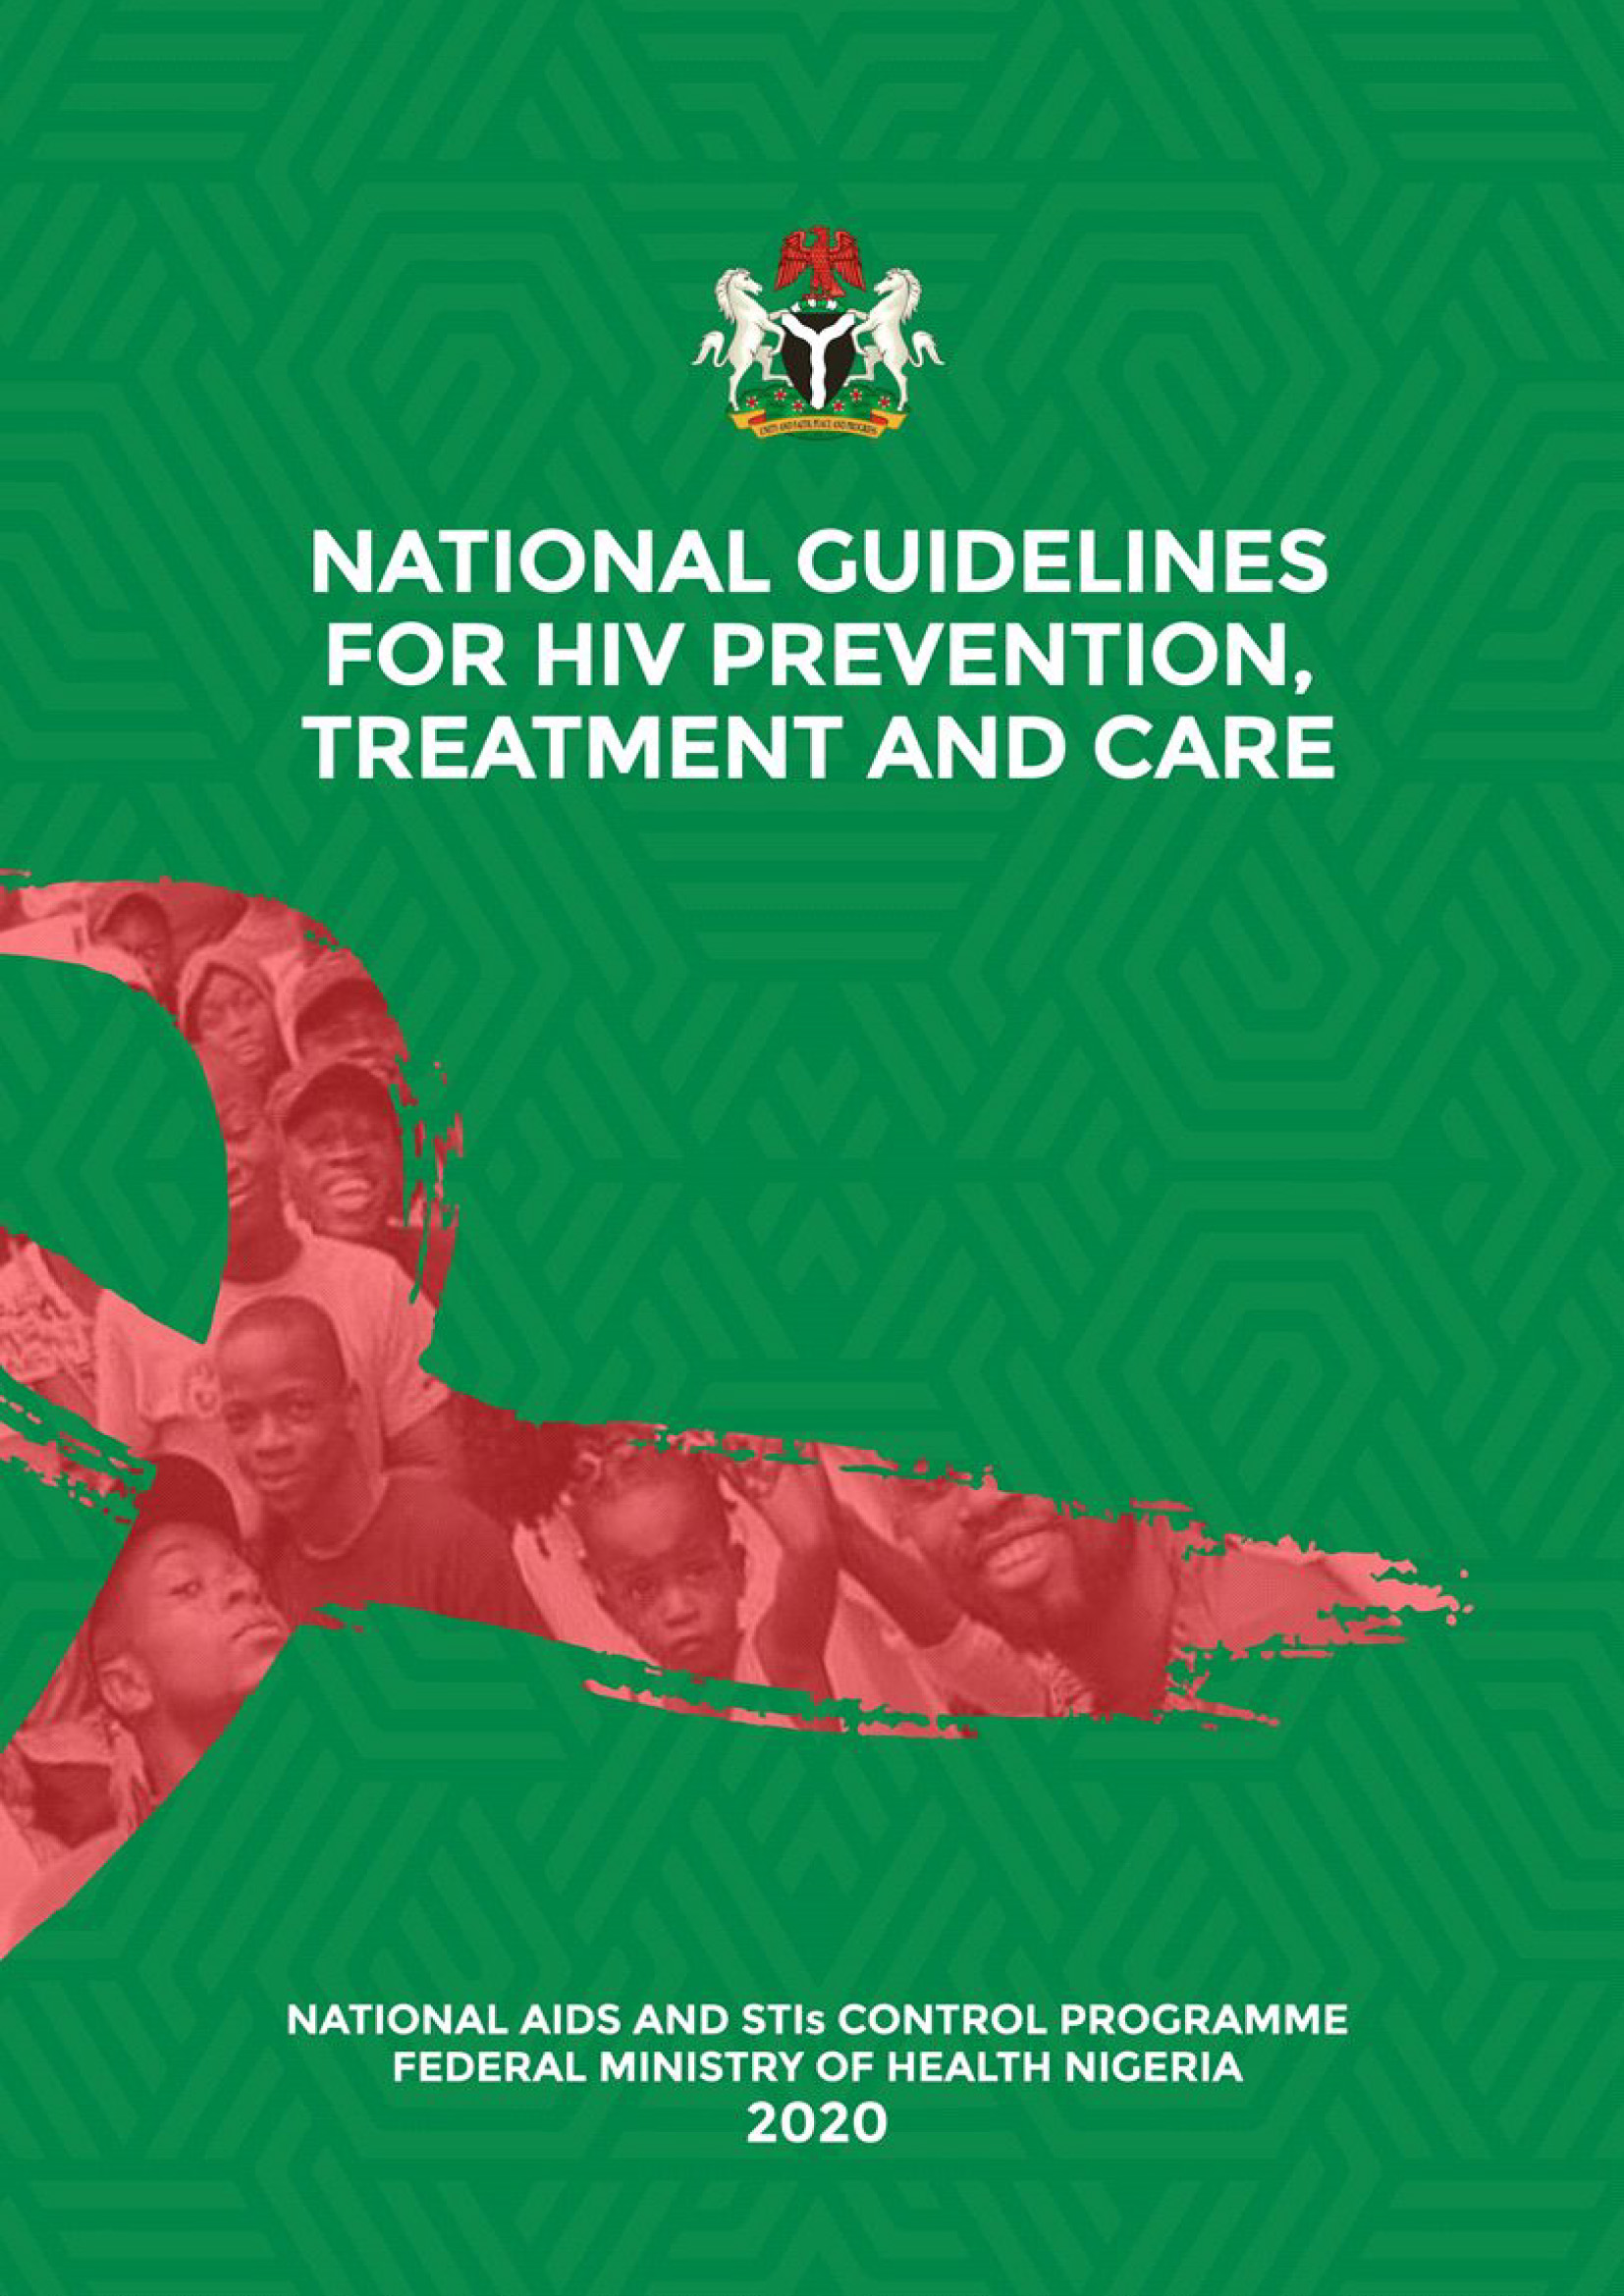 National AIDS and STIs Control Programme, Federal Ministry of Health, Nigeria 